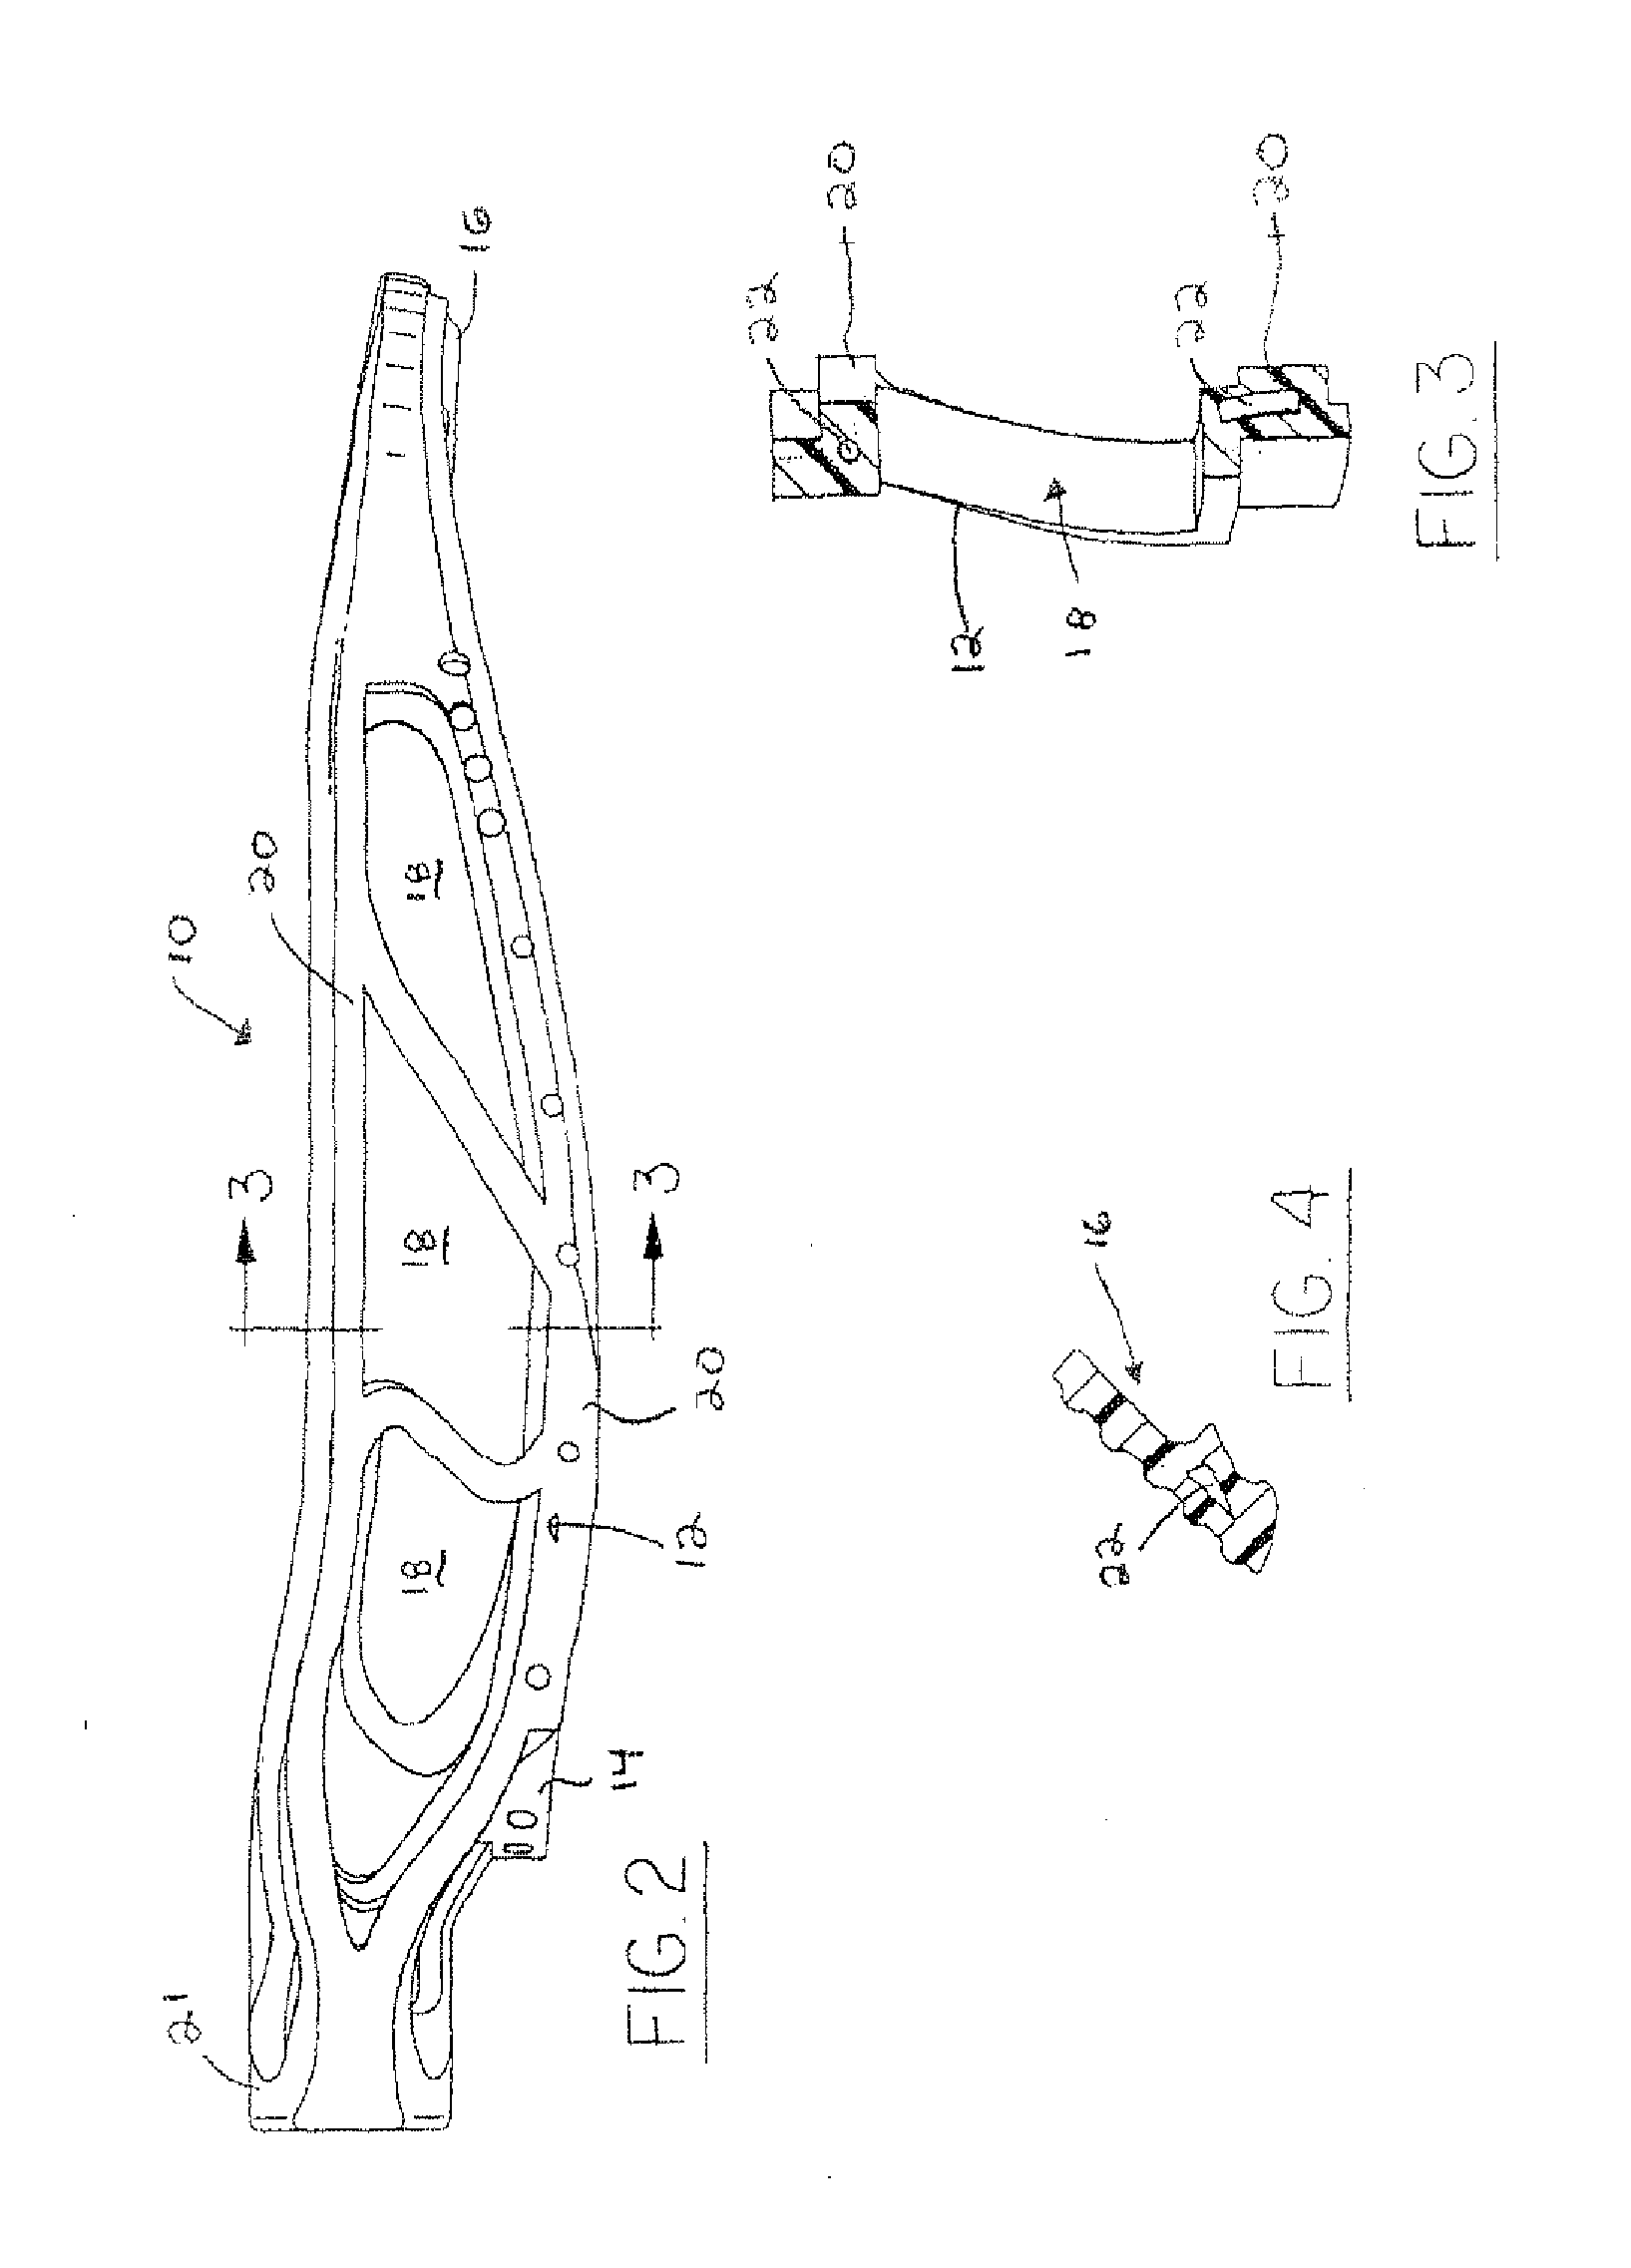 Lacrosse head and method of forming same